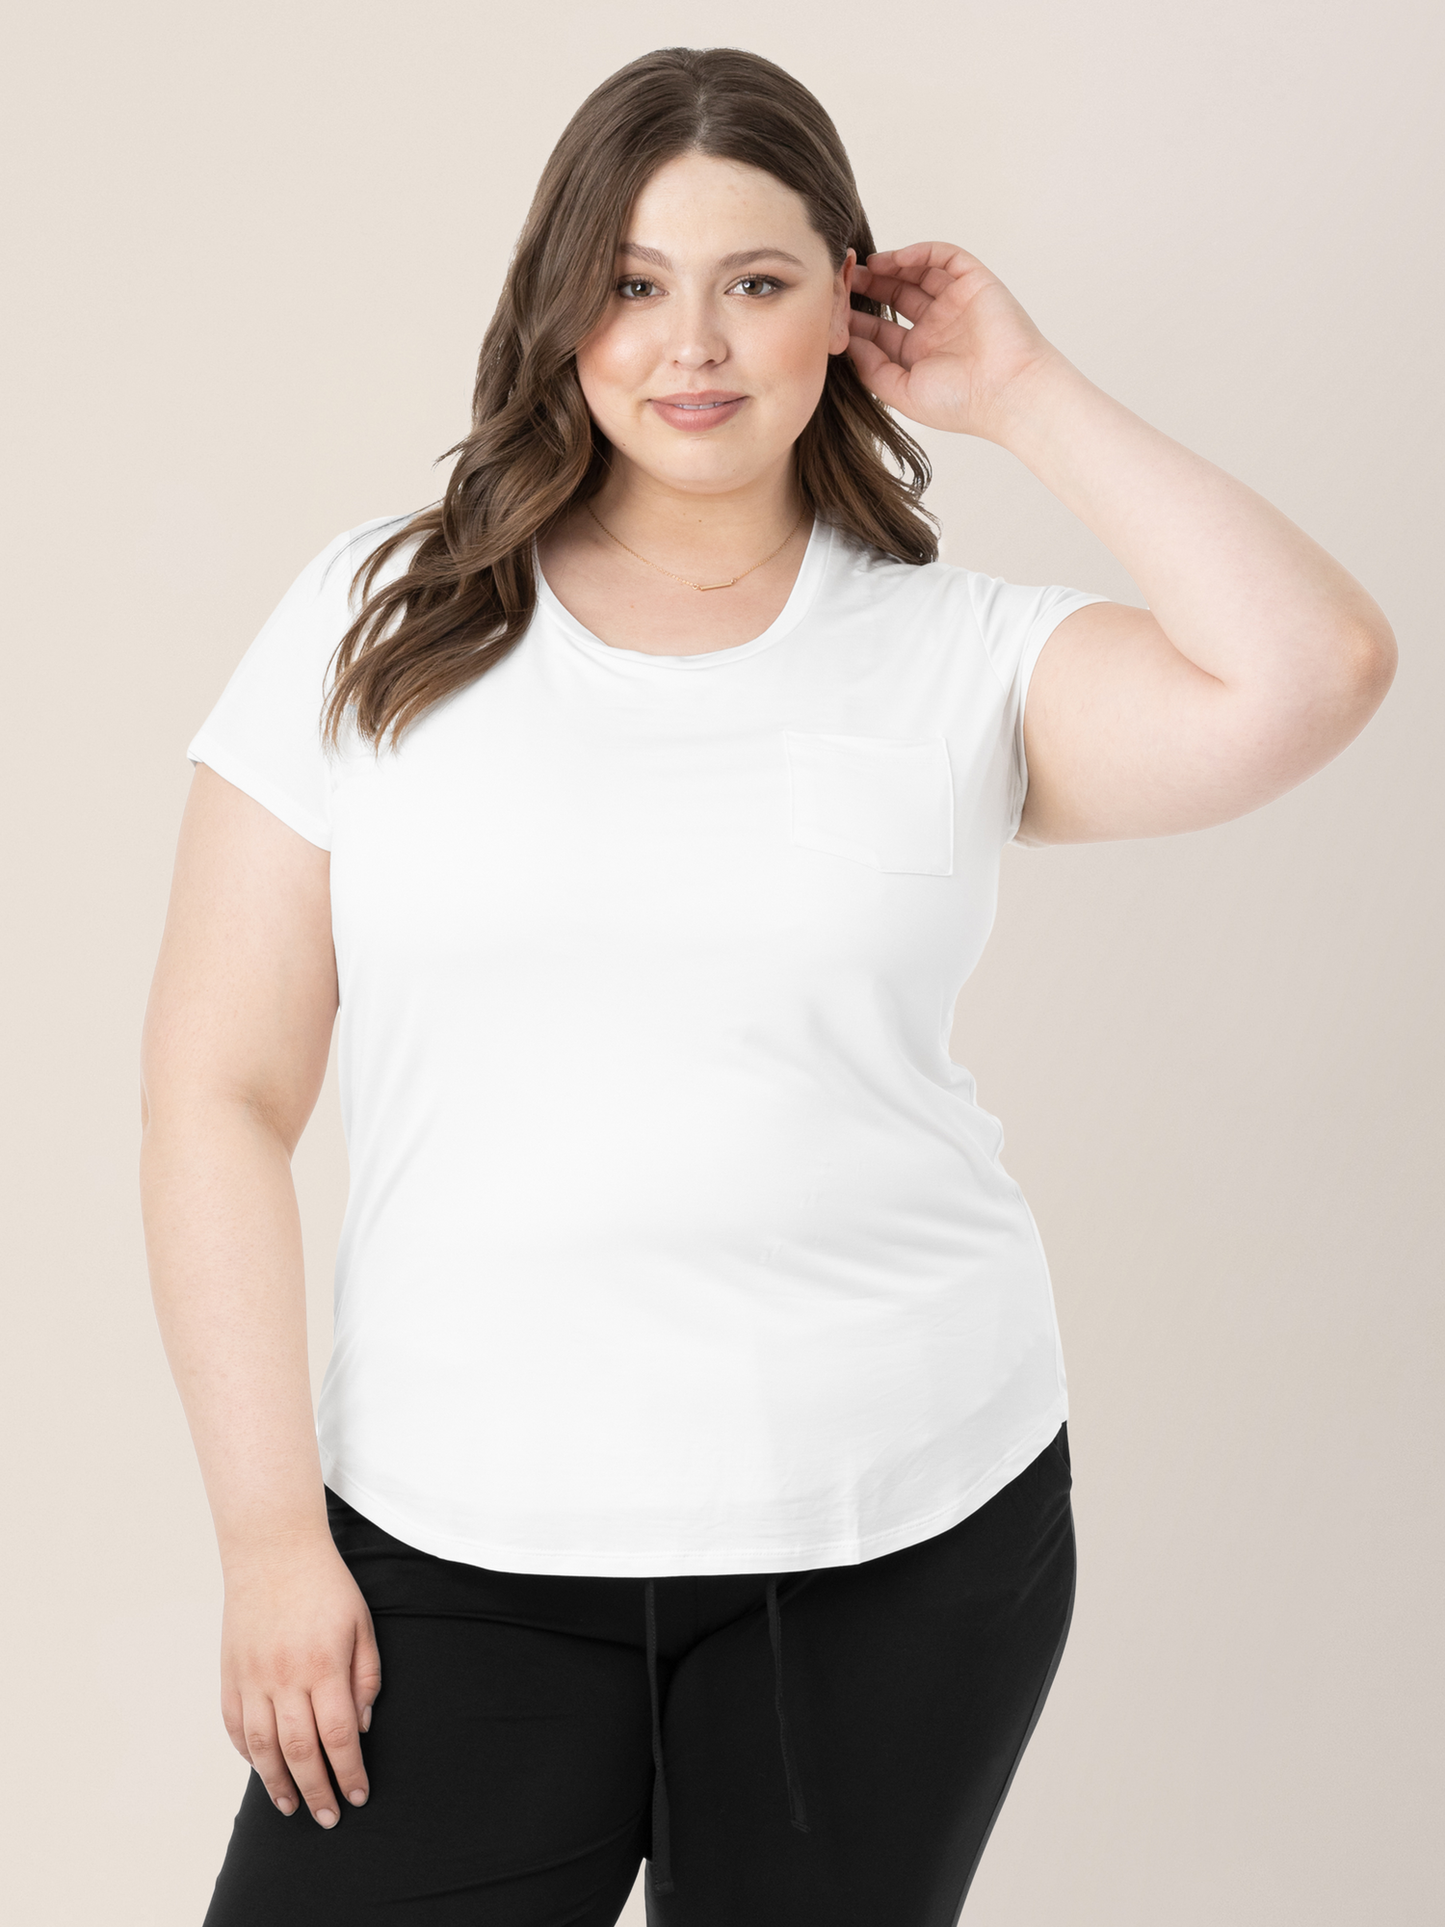 Model wearing the Everyday Maternity & Nursing T-shirt in White tucking her hair behind her ear.@model_info:Bailey is wearing an X-Large.